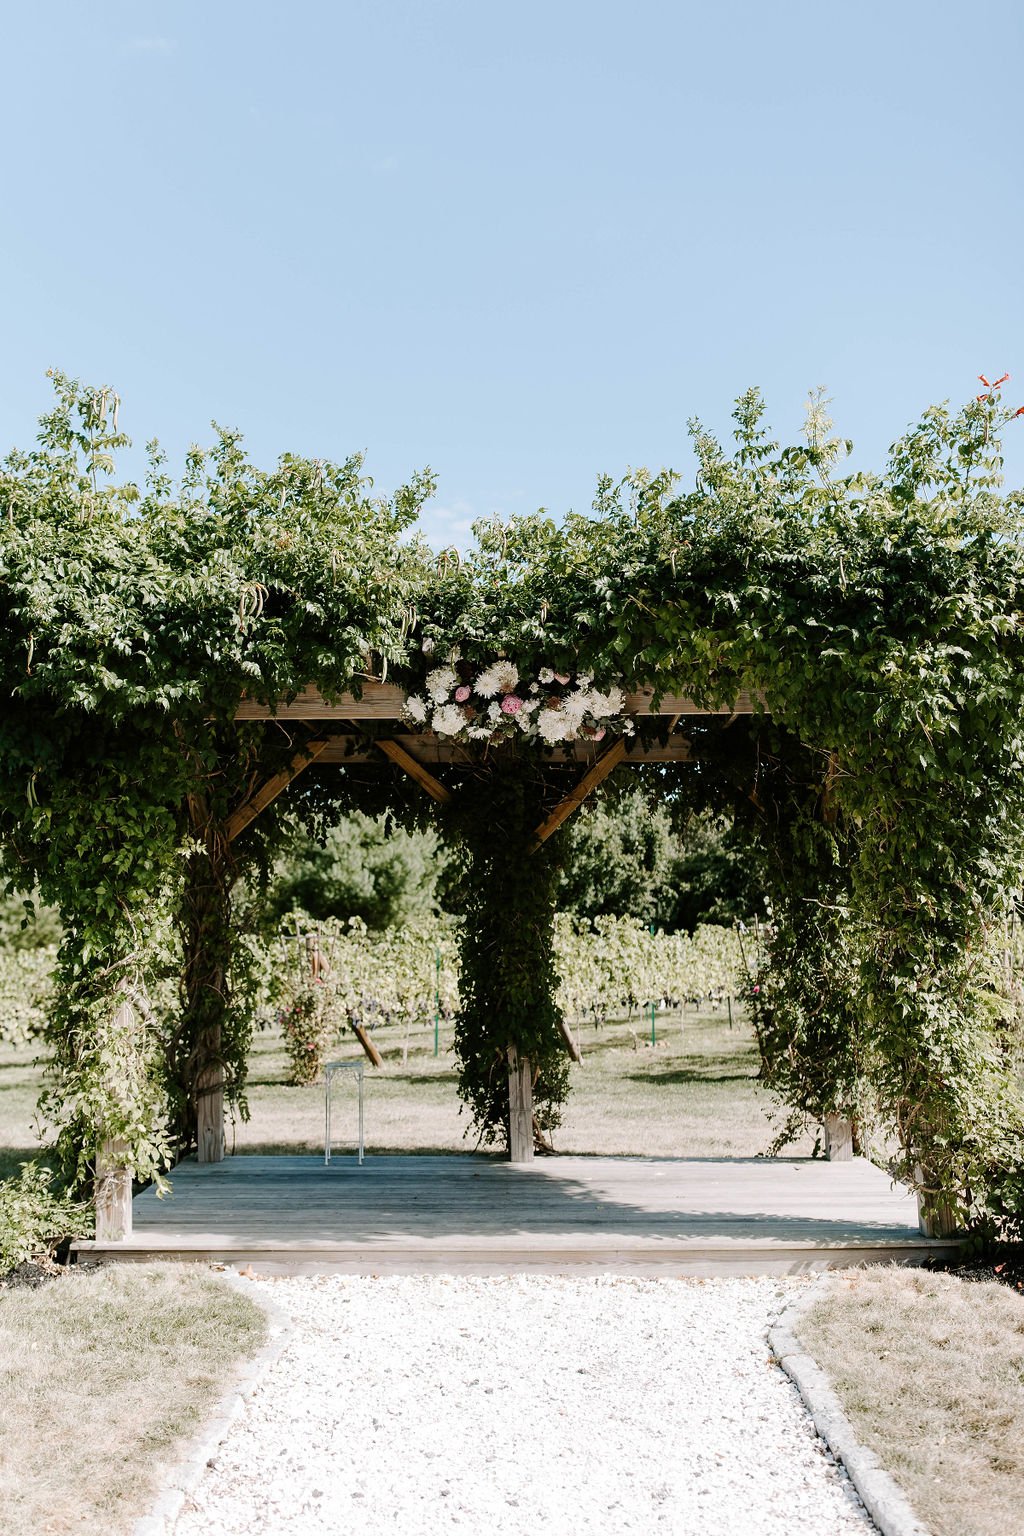  Ceremonial arch covered in green vines and floral arrangements 